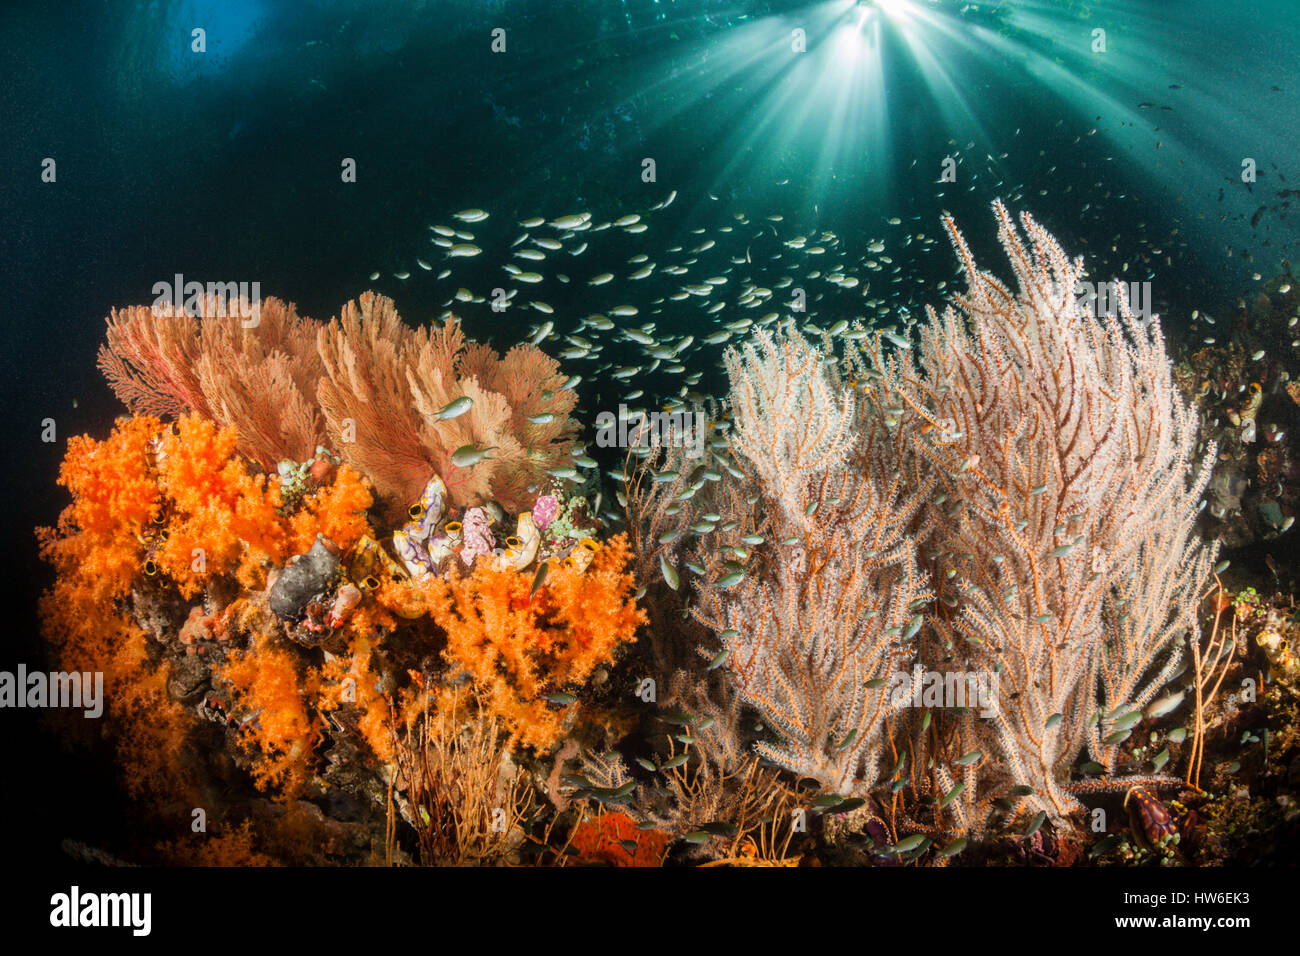 Corals growing near Mangroves, Raja Ampat, West Papua, Indonesia Stock Photo